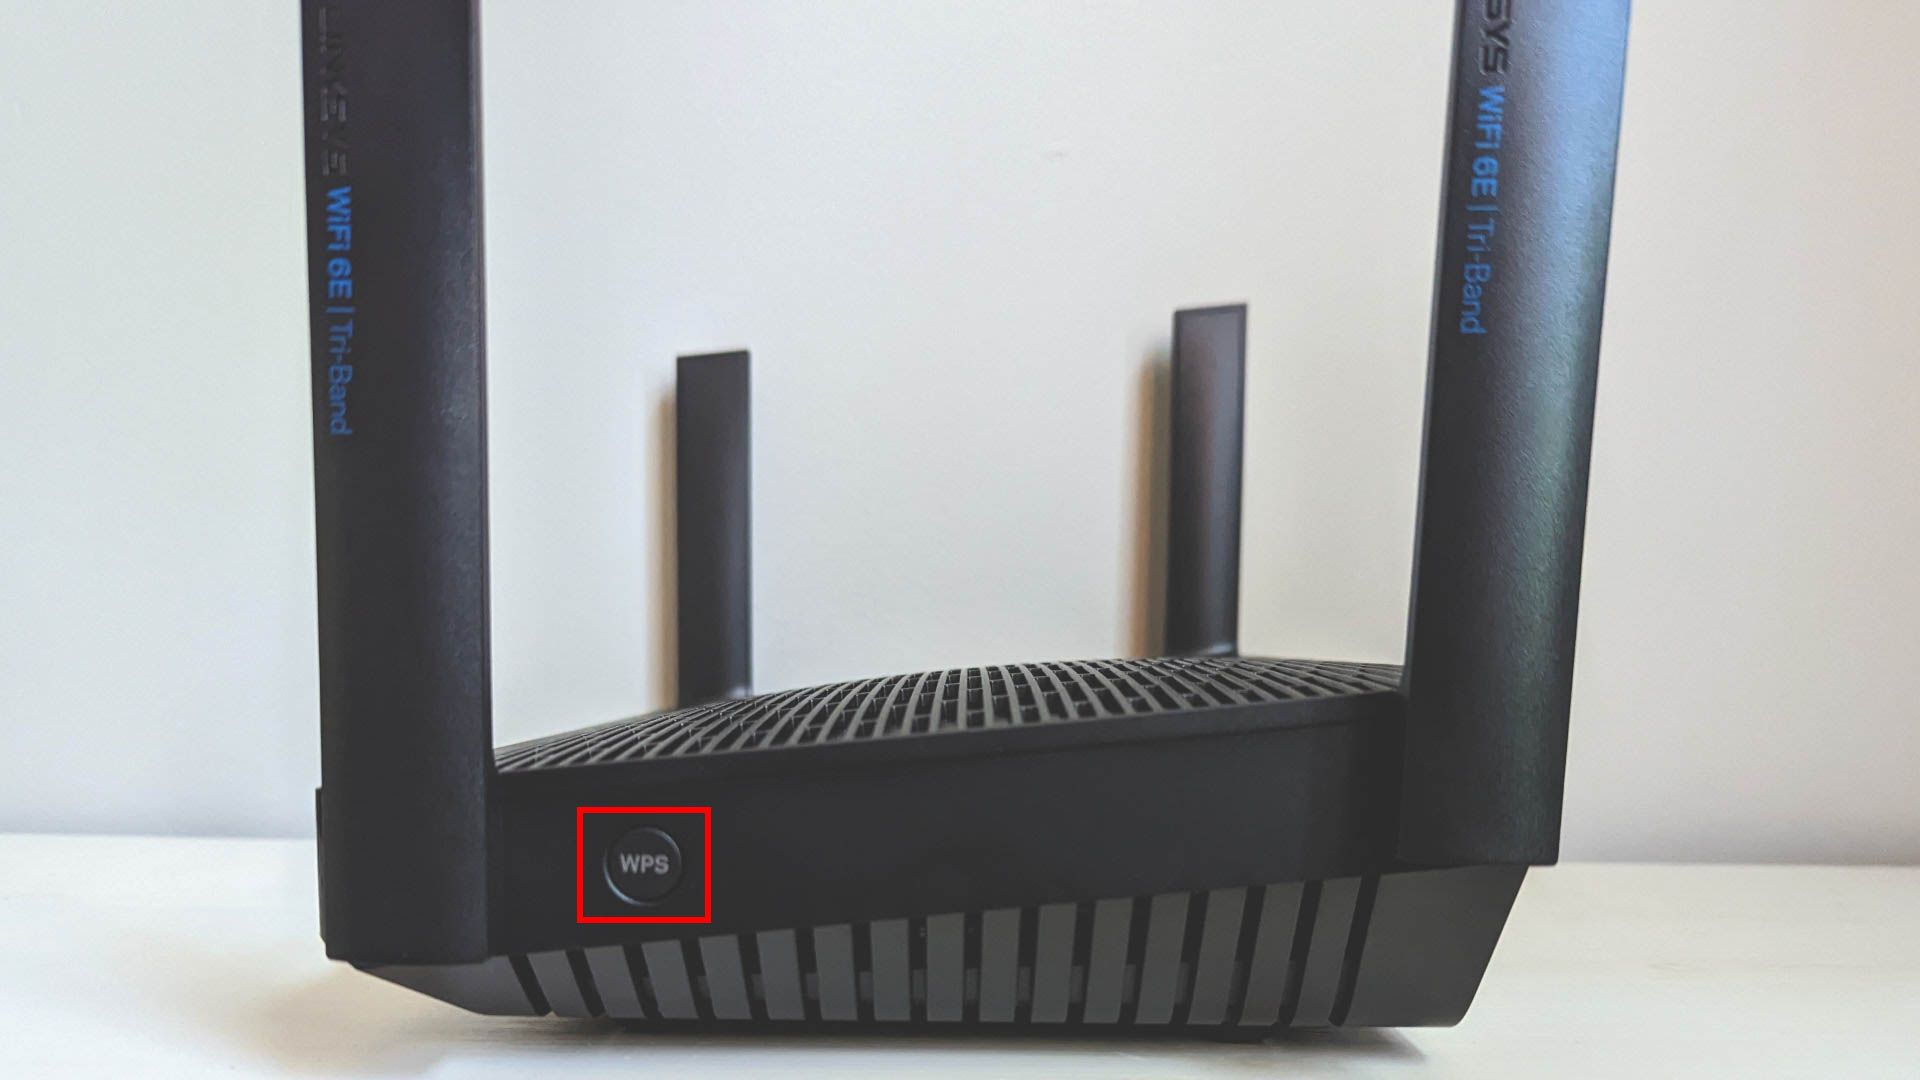 Side panel with WPS button on the Linksys Hydra Pro 6E router.